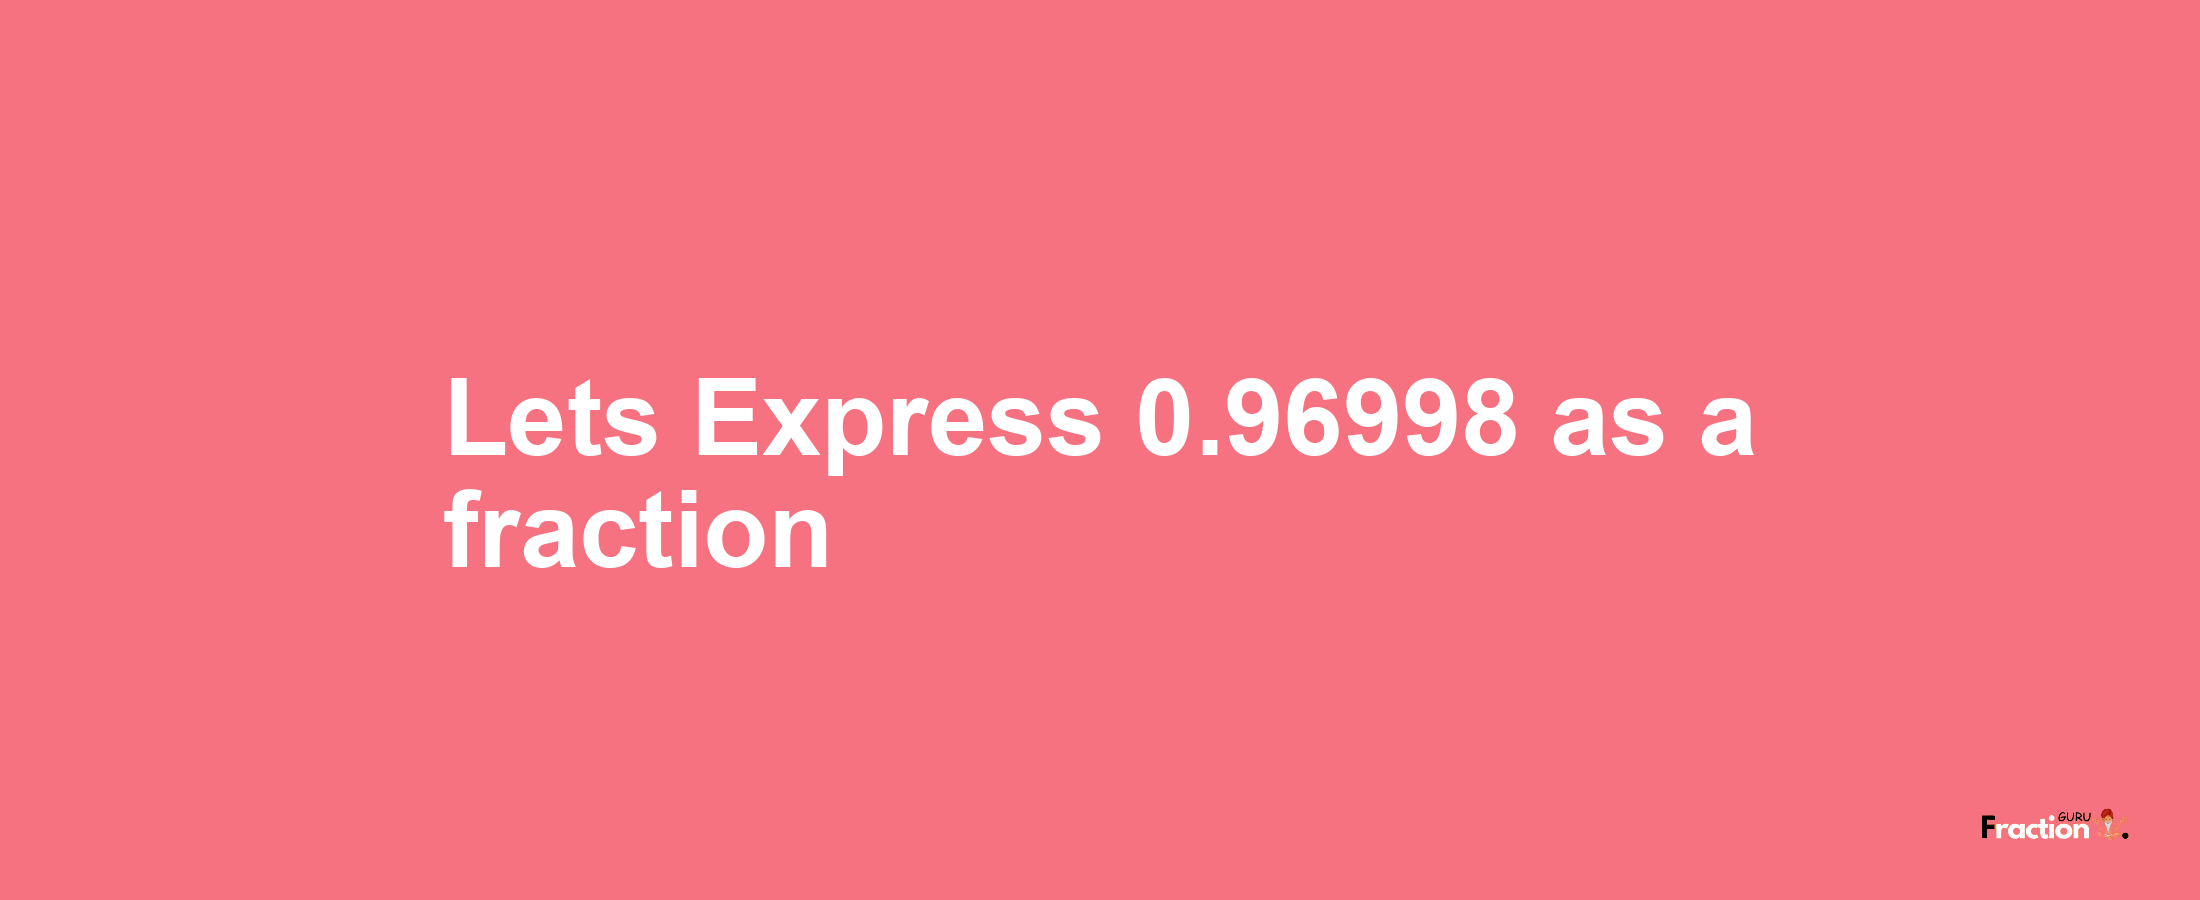 Lets Express 0.96998 as afraction